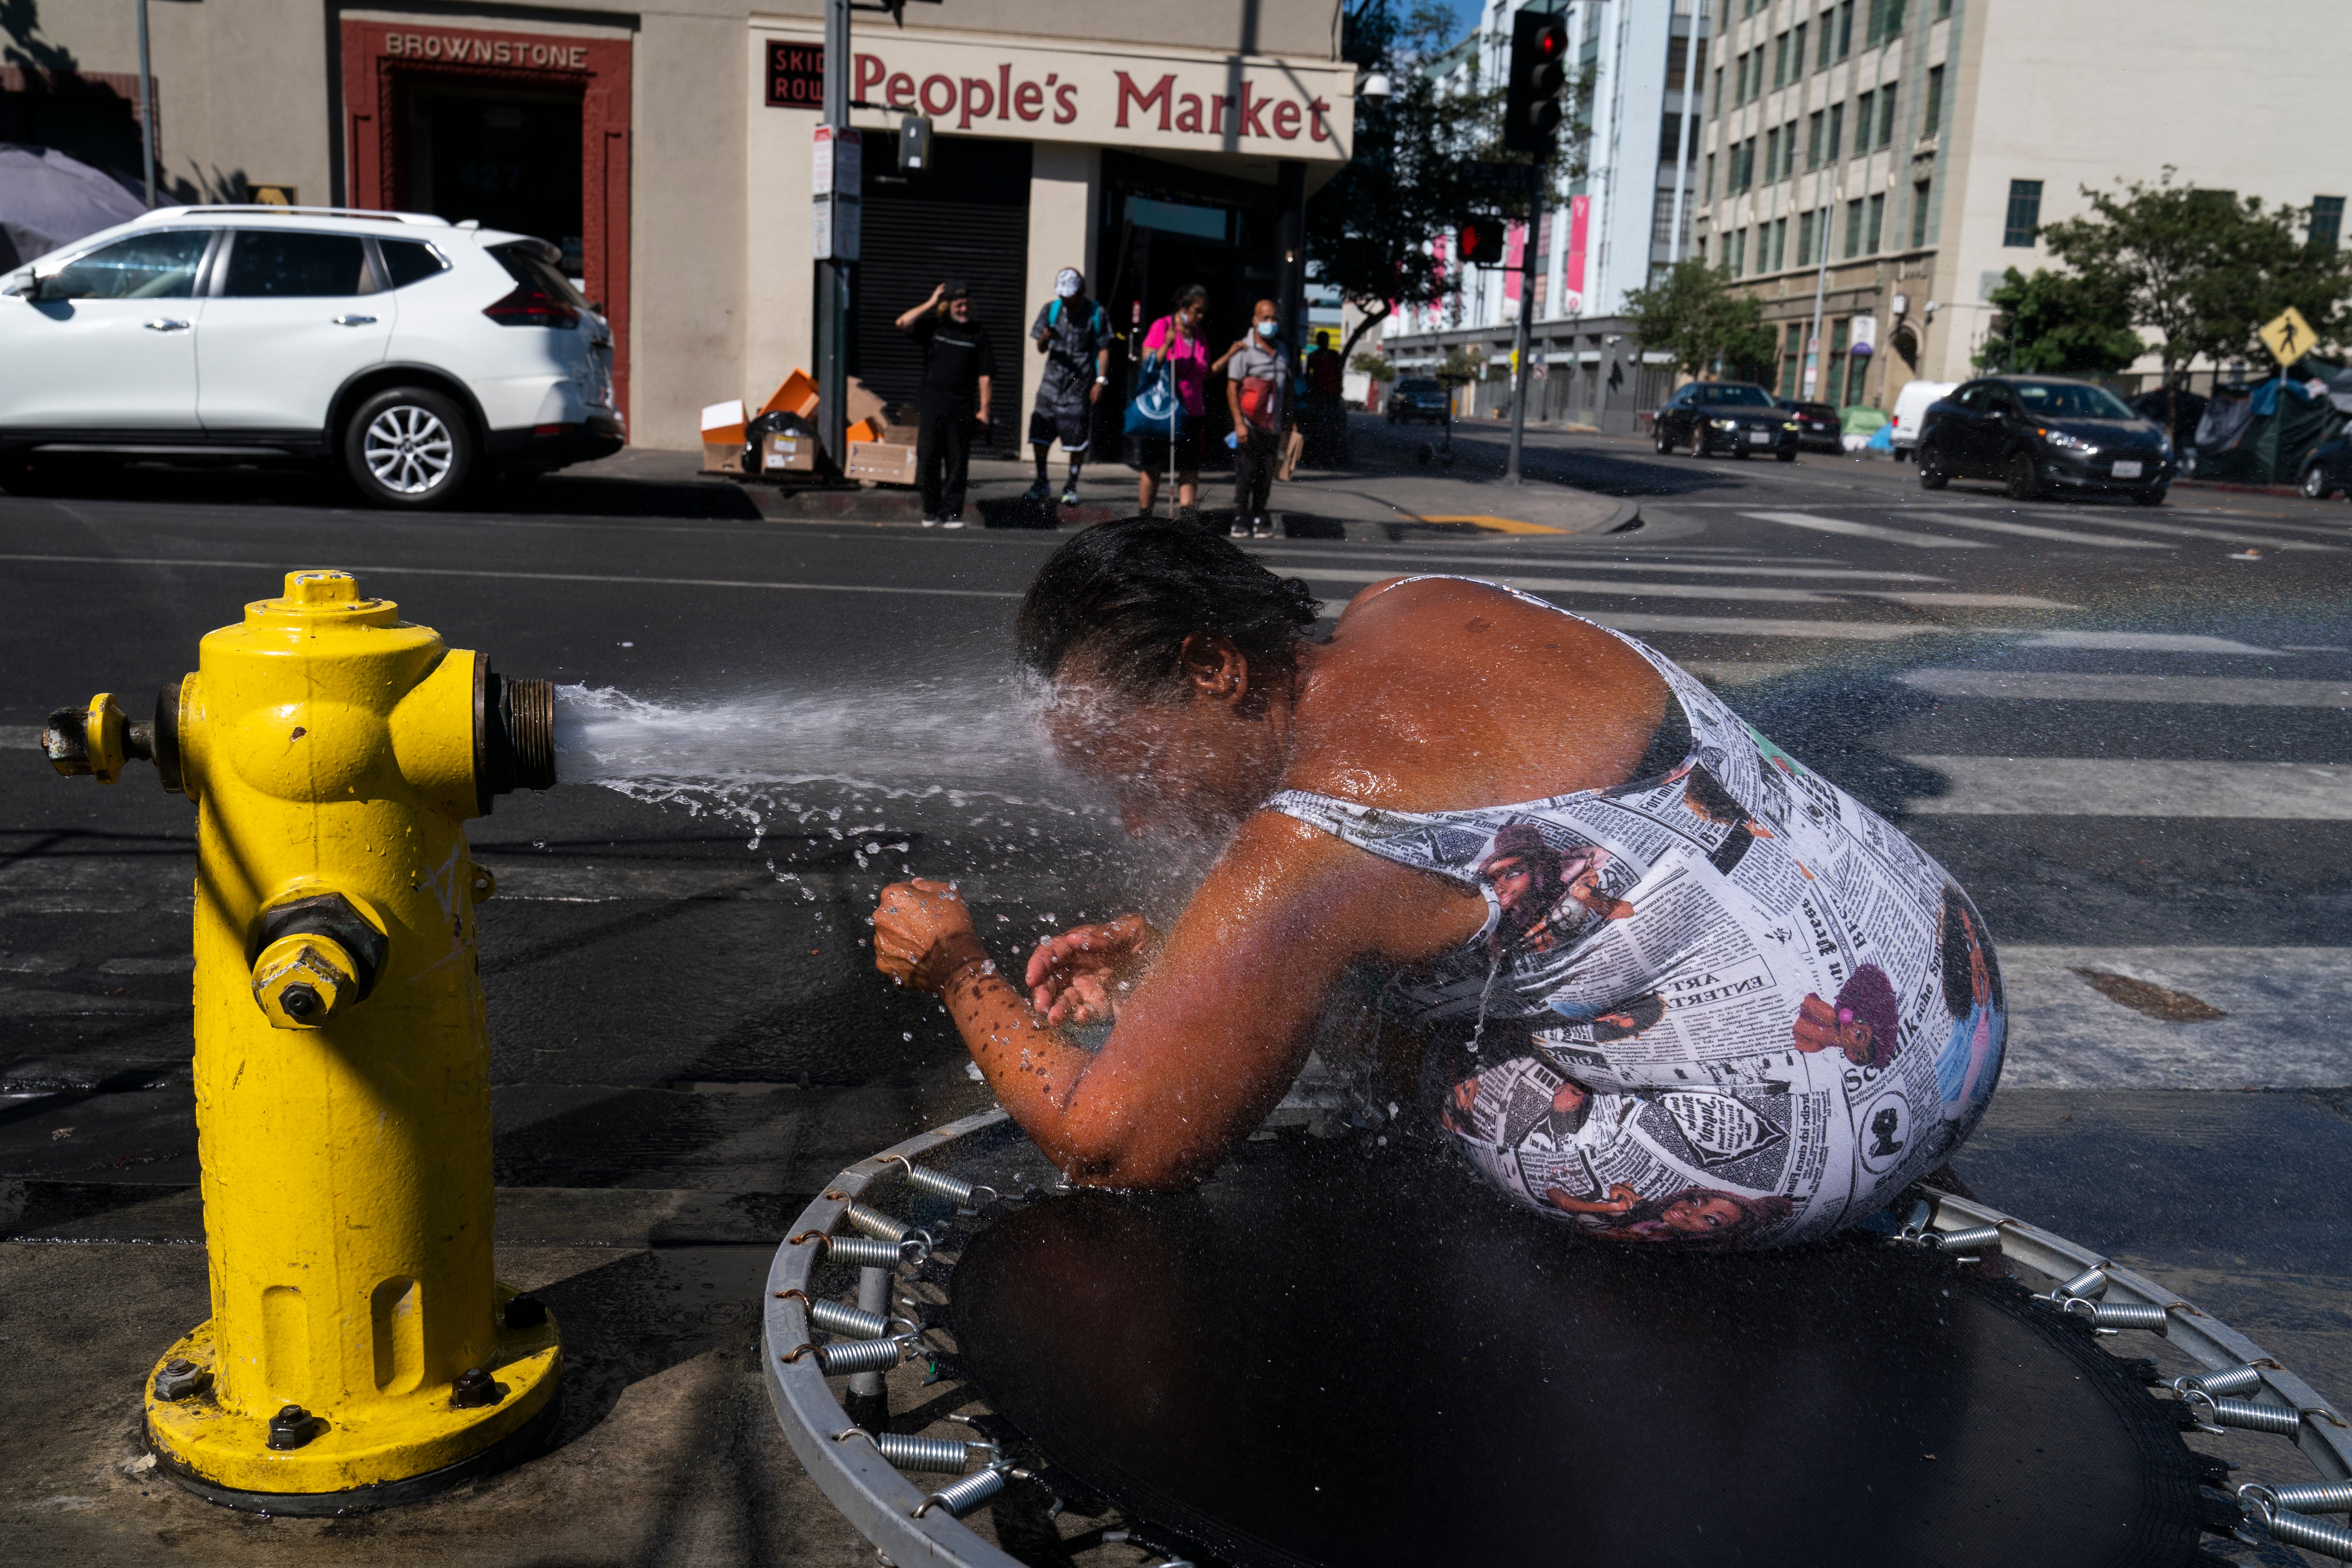 Stephanie Williams, 60, cools off with water from a hydrant in the Skid Row area of Los Angeles during the current heatwave